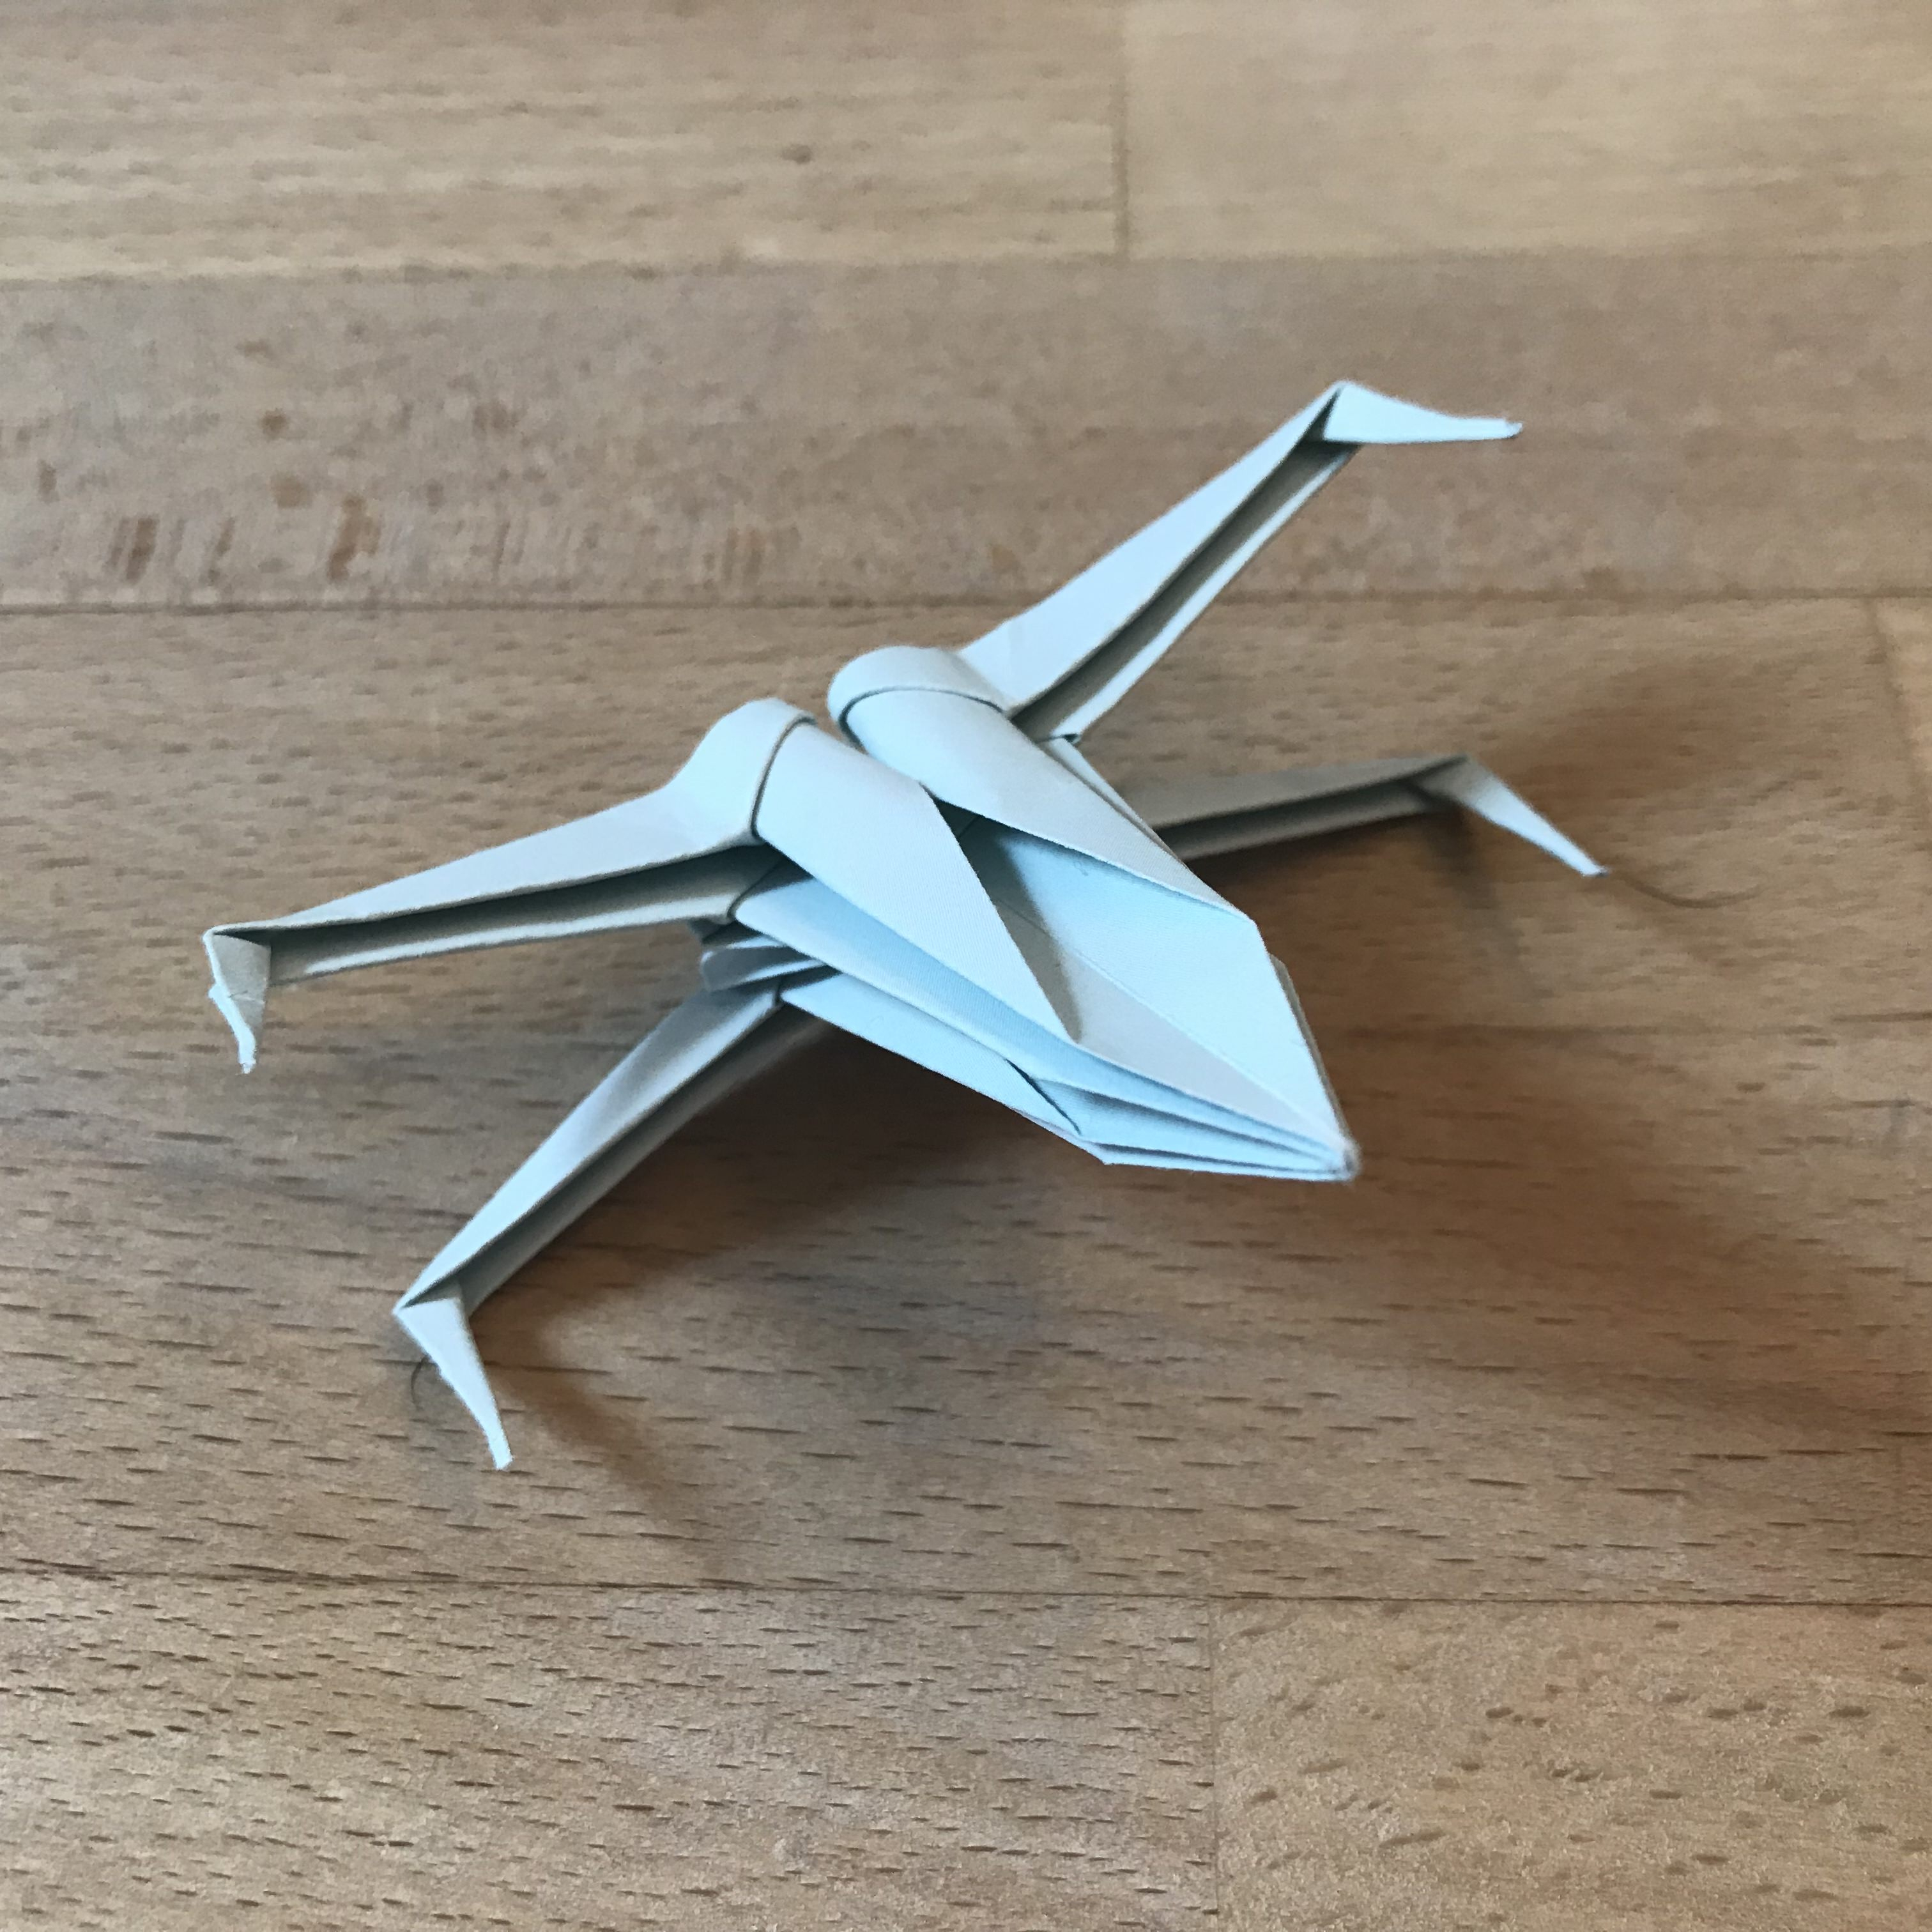 Star Wars X Wing Origami How To Make An Origami Star Wars X Wing Album On Imgur